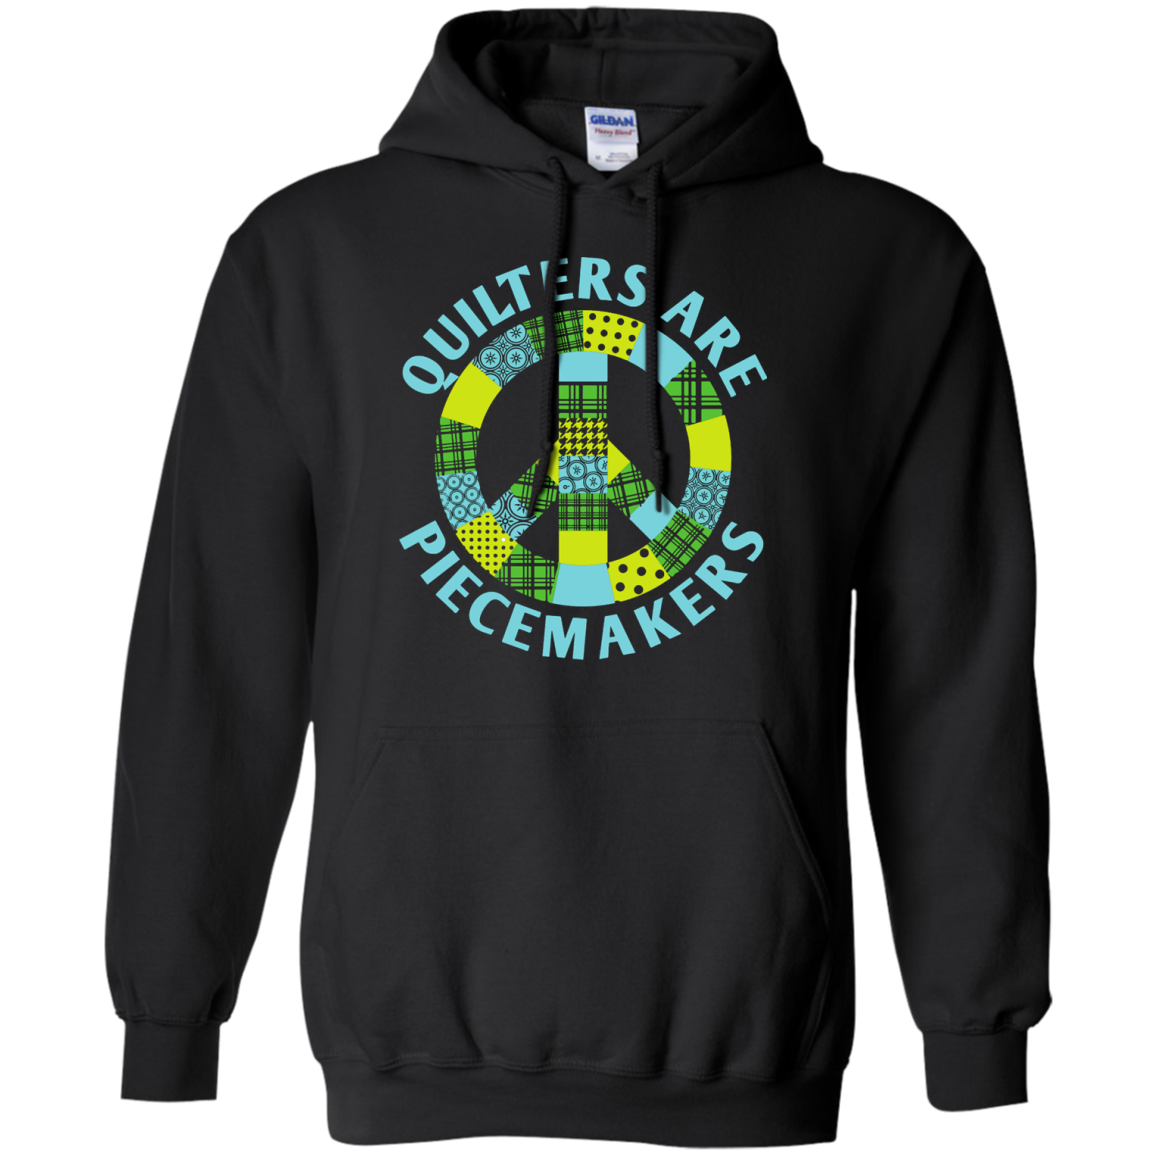 Quilters are Piecemakers Pullover Hoodies - Crafter4Life - 1